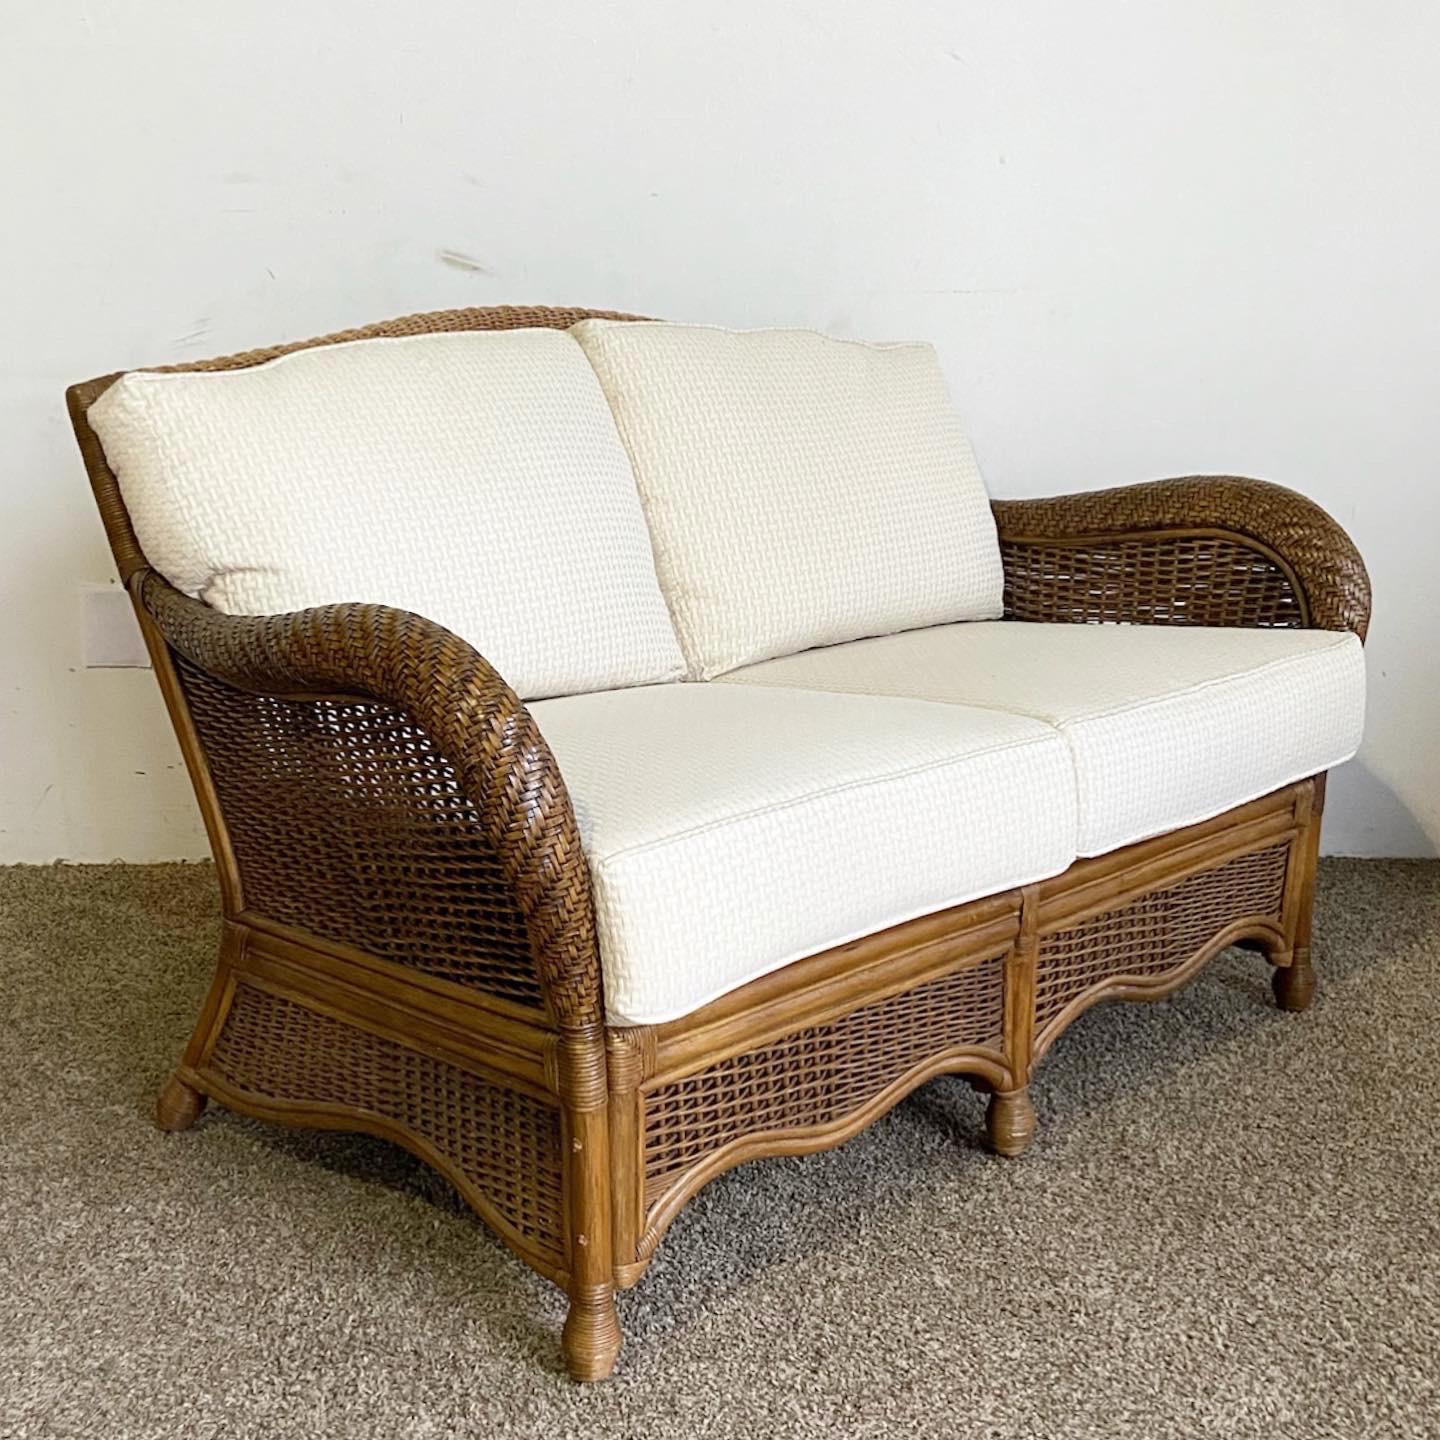 Experience relaxed elegance with the Bamboo Rattan Wicker Love Seat, infused with Boho Chic vibes and complemented by plush cushions.

Bamboo Rattan Wicker Love Seat with Boho Chic charm.
Sturdy bamboo frame with intricate wicker weave.
Flexible